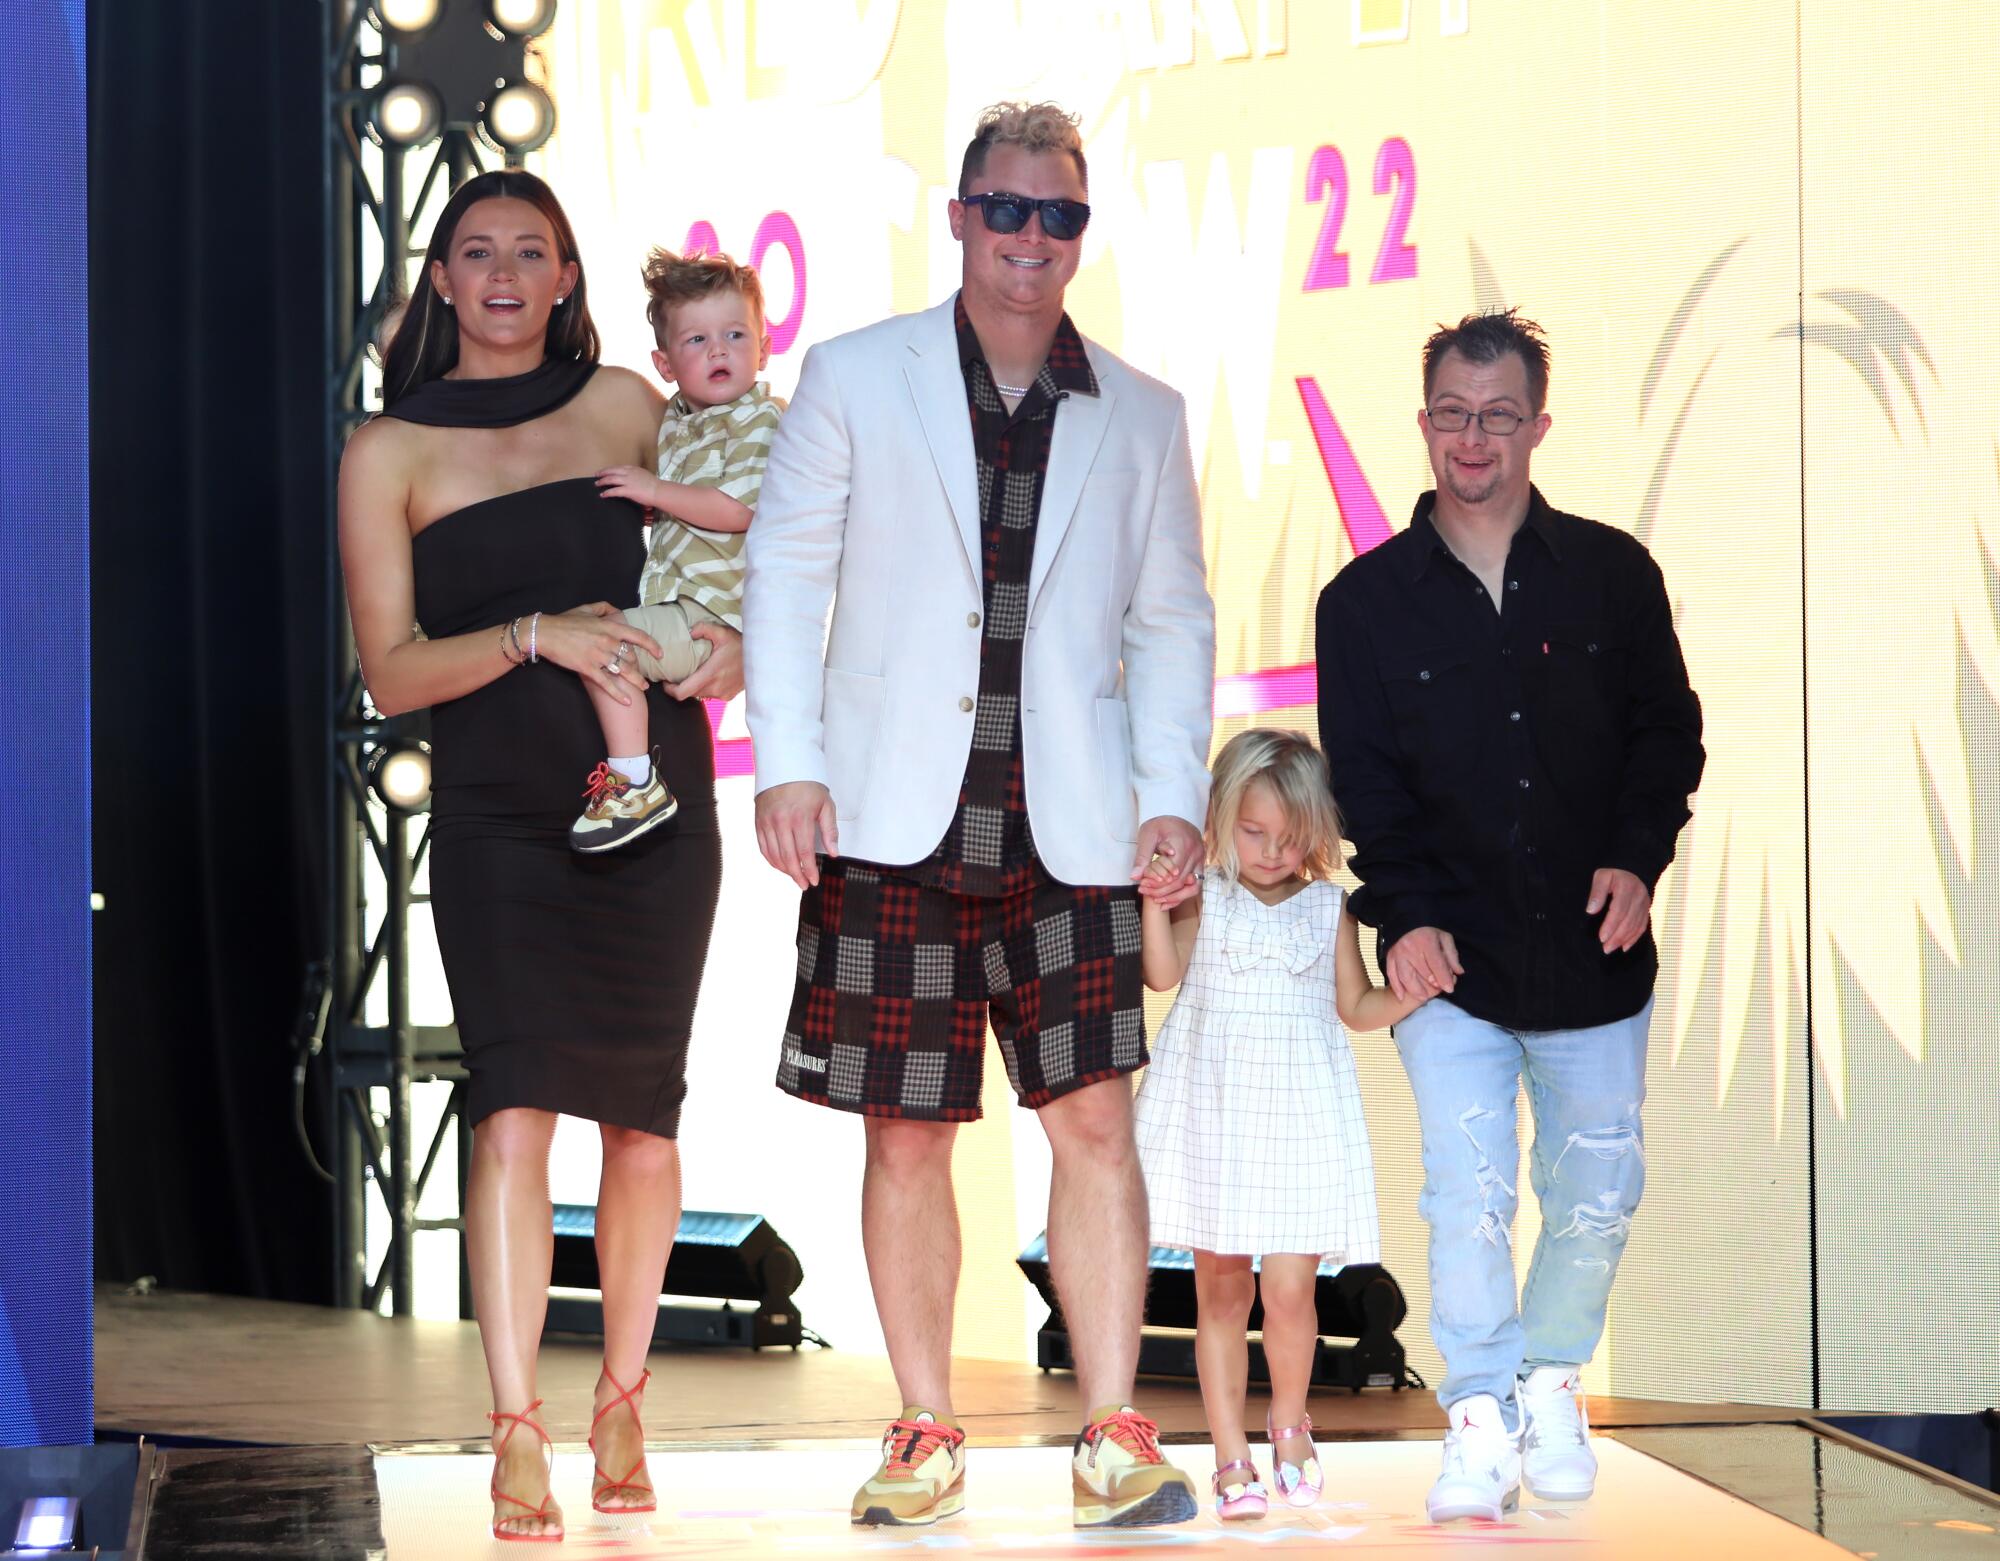 Joc Pederson in shorts and a shirt and jacket arrives with his family at the 2022 MLB All-Star Game Red Carpet Show.